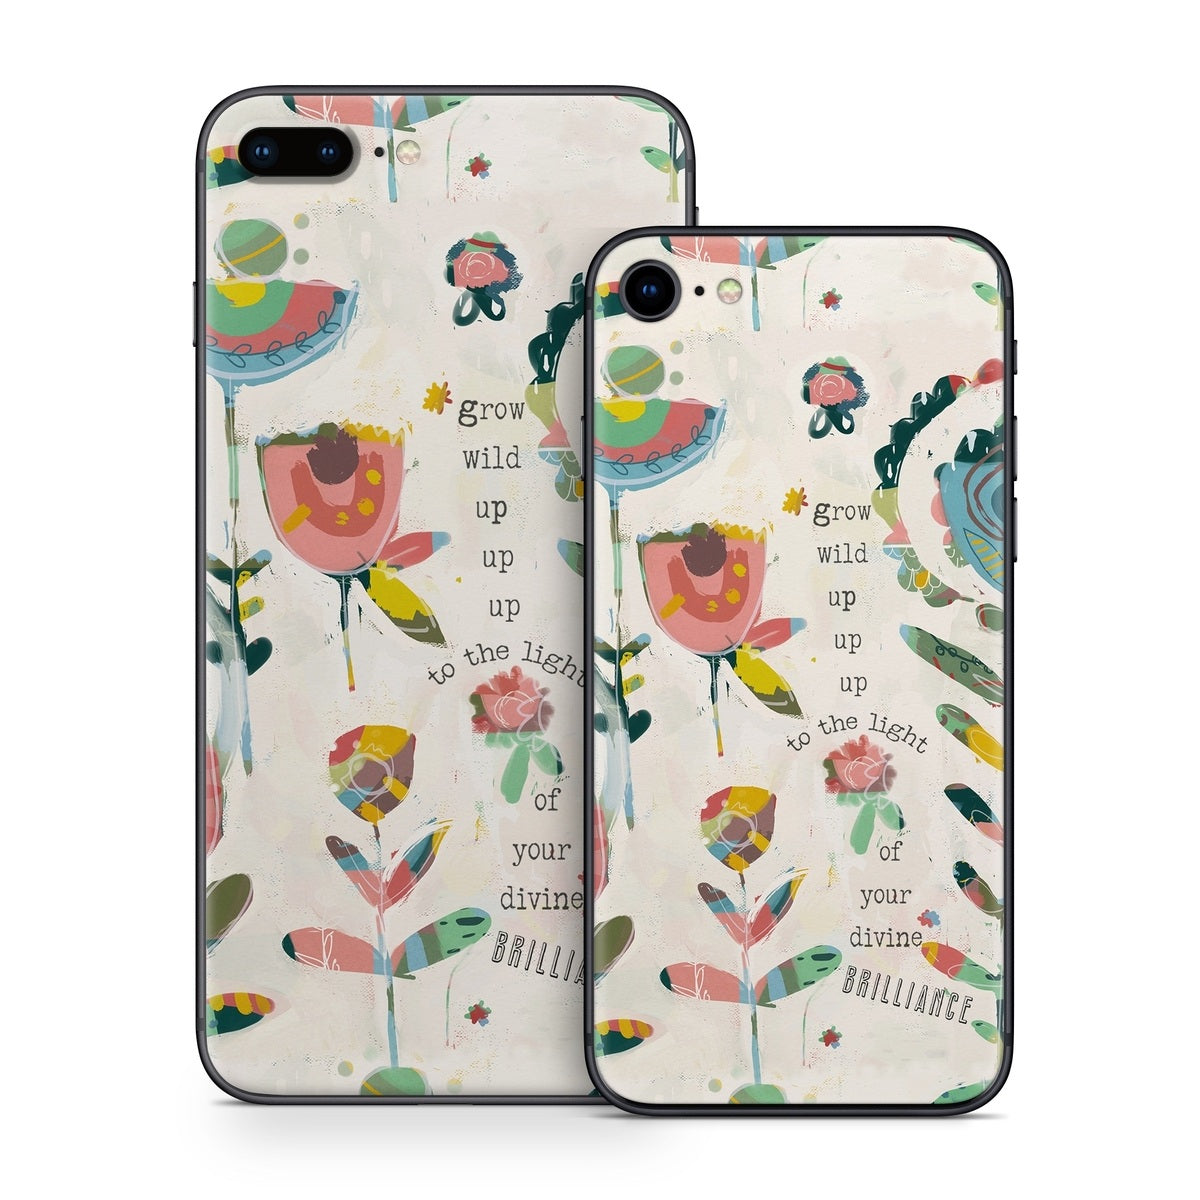 It's Never Too Late - Apple iPhone 8 Skin